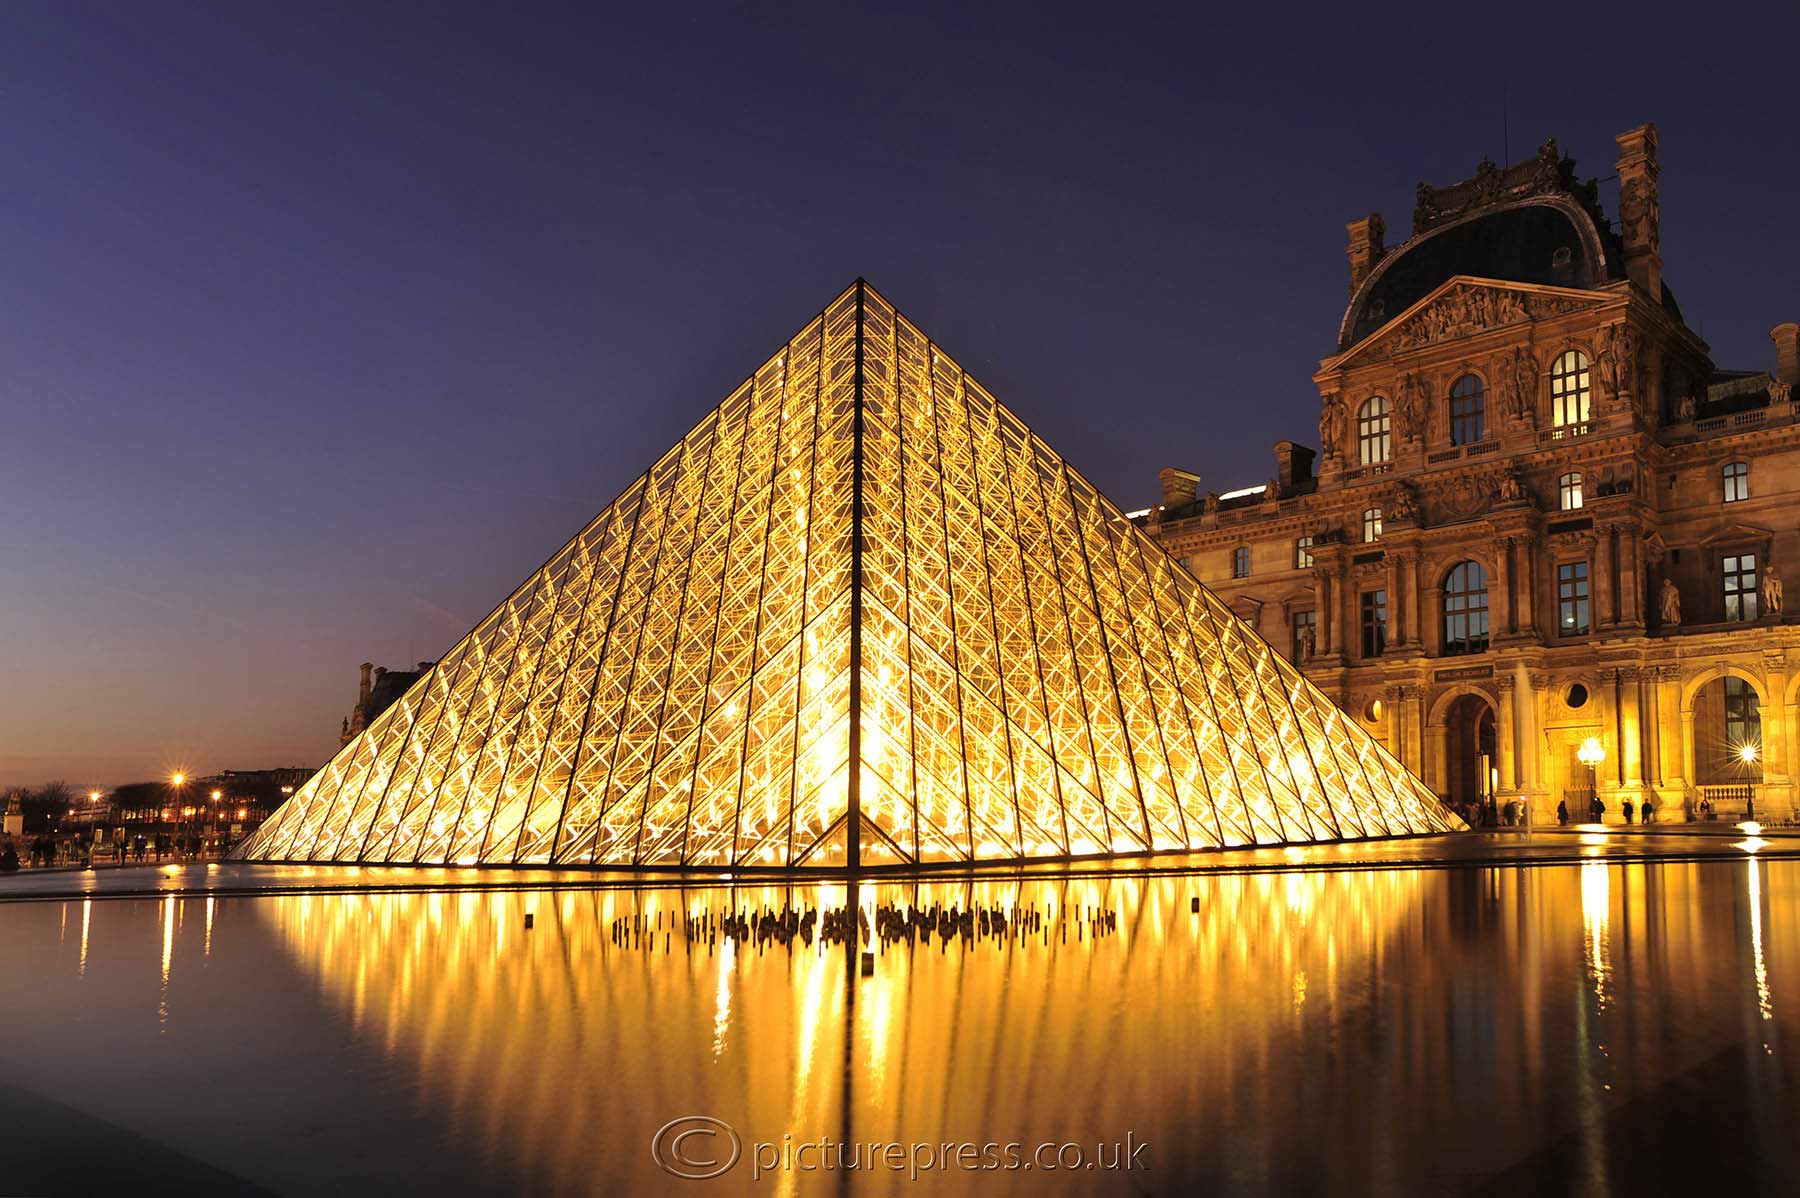 louvre Paris at dusk. photo taken for image library by mike kelly photographer picturepress